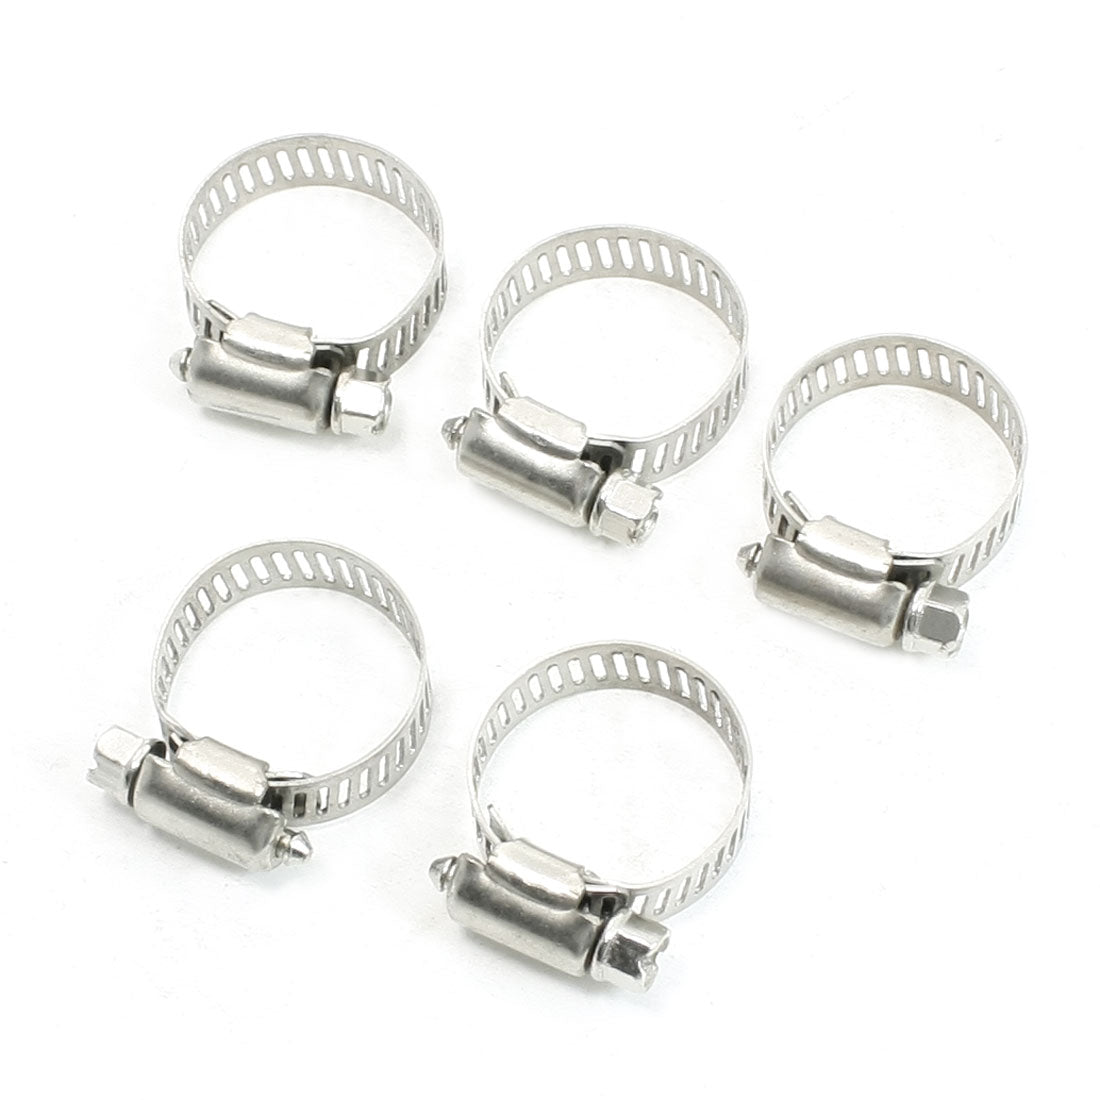 uxcell Uxcell Adjustable 16mm-25mm Stainless Steel  Gear Hose Clamps 5 Pcs